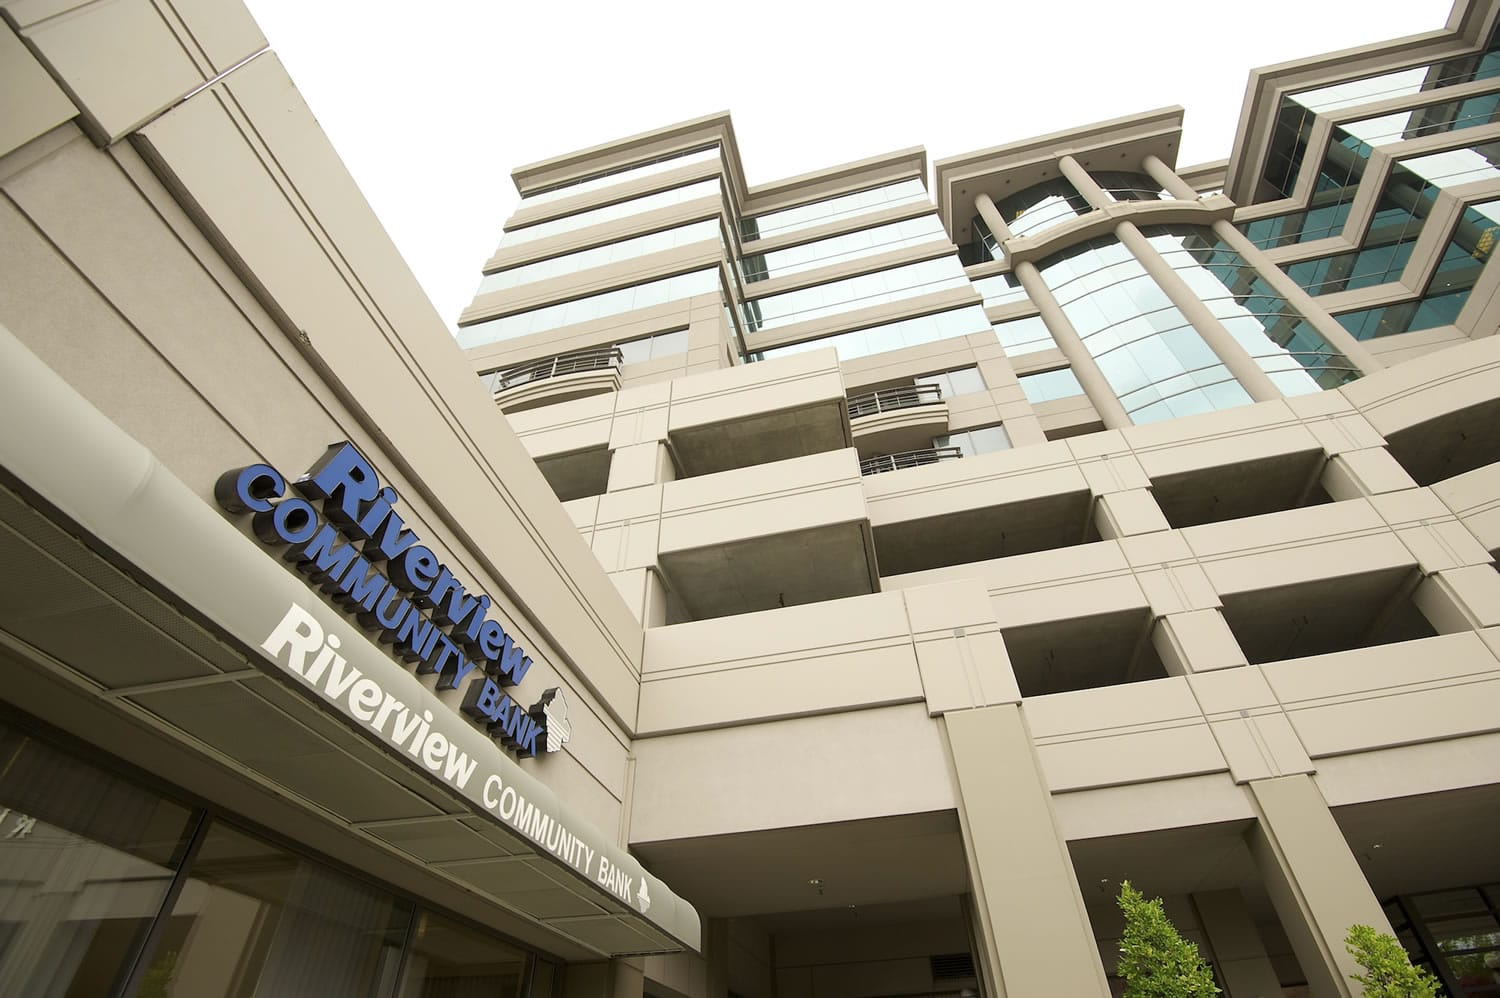 Vancouver-based Riverview Bancorp, parent of Riverview Community Bank, reported a loss of $12.8 million, or 57 cents per share, in its fourth fiscal quarter ending March 31.